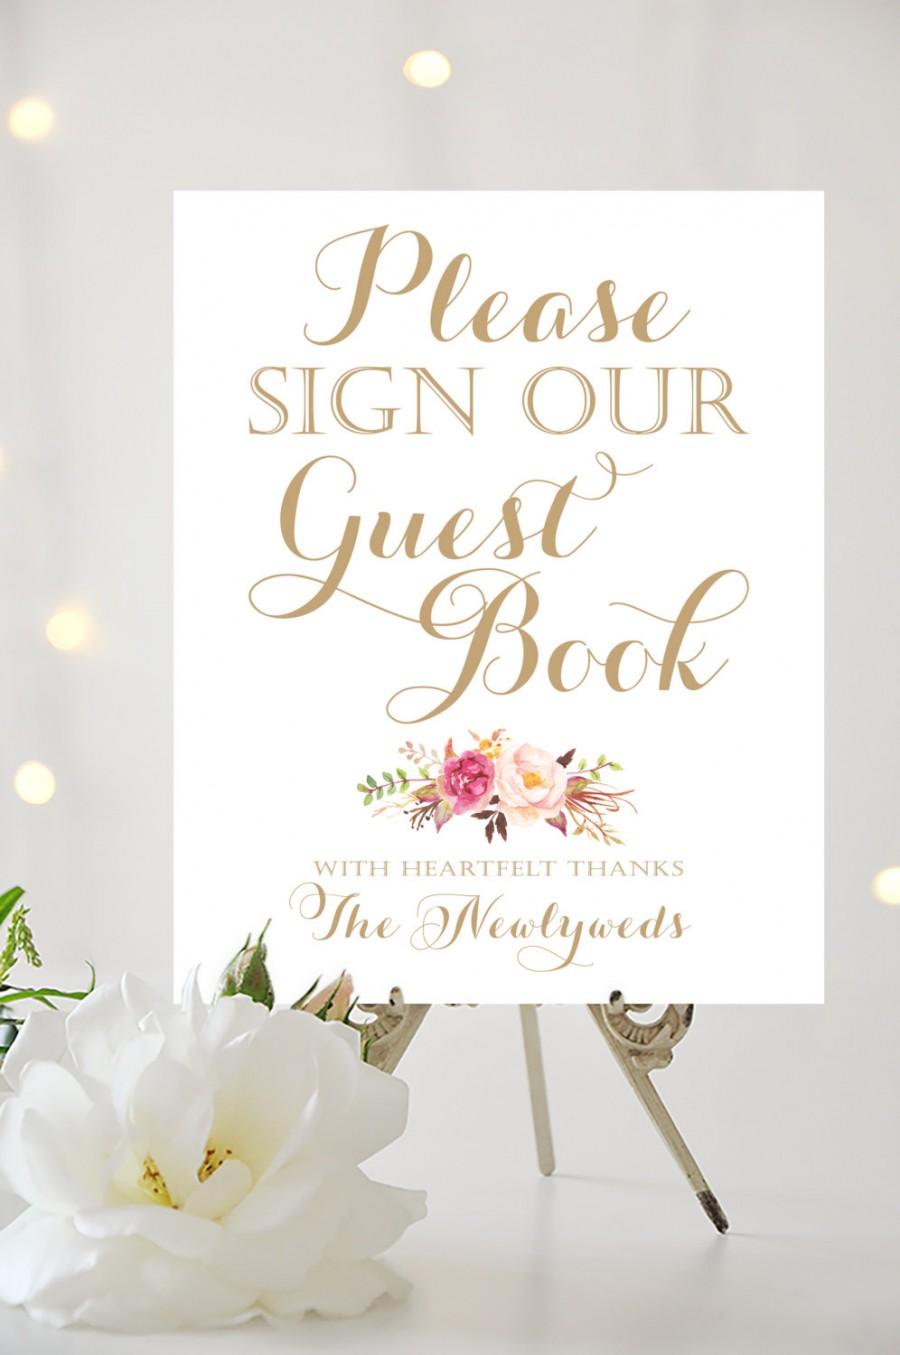 Hochzeit - Wedding Sign - Please Sign Our Guestbook - 8 x 10 - DIY Printable - Vintage antique gold - PDF and JPG files - Instant Download